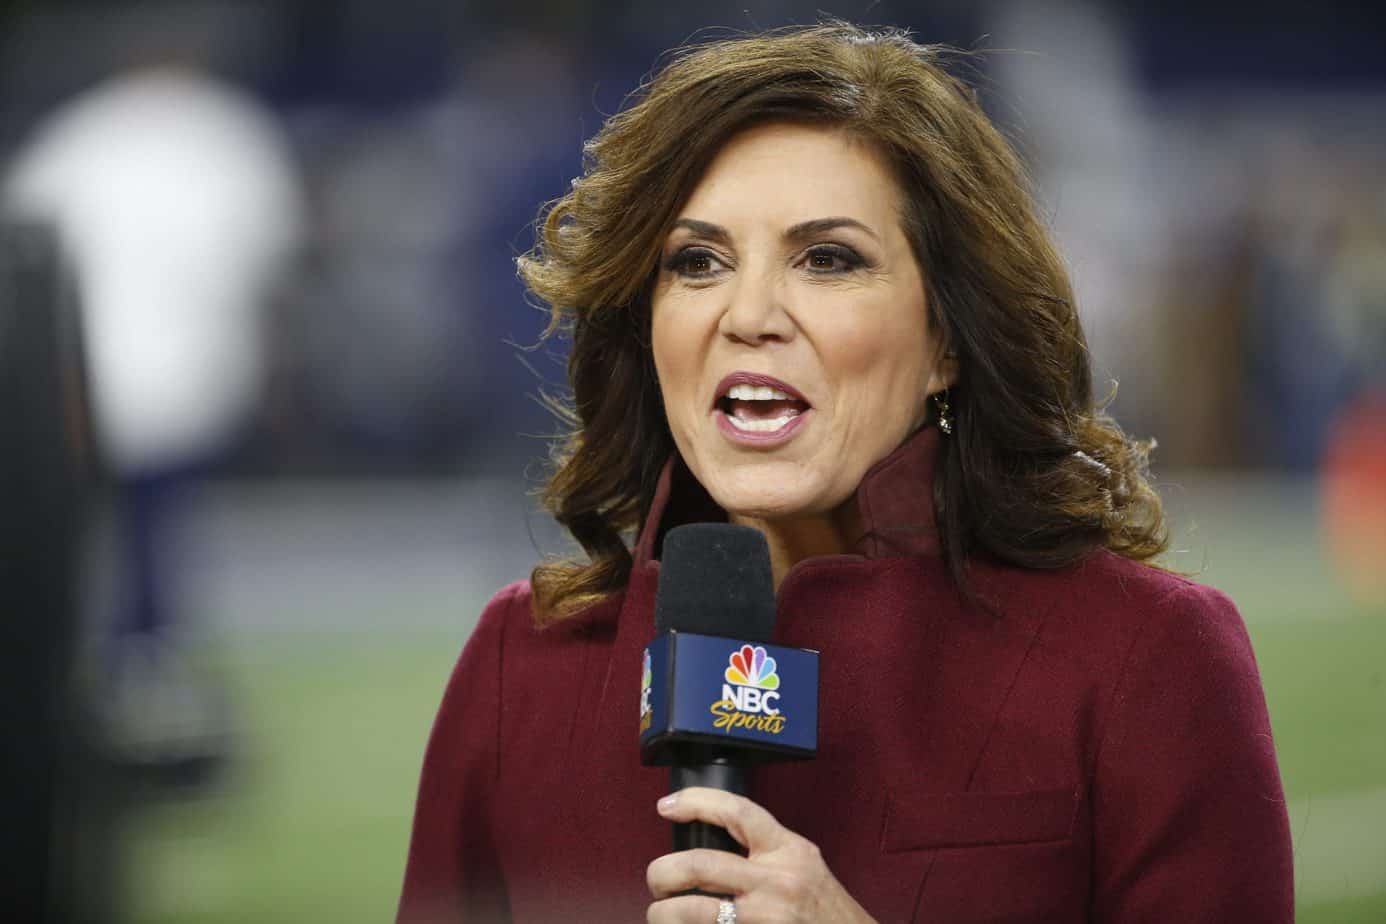 According to a report, NBC's Michele Tafoya is set to retire this year after it was rumored that she was suspended over a Colin Kaepernick take